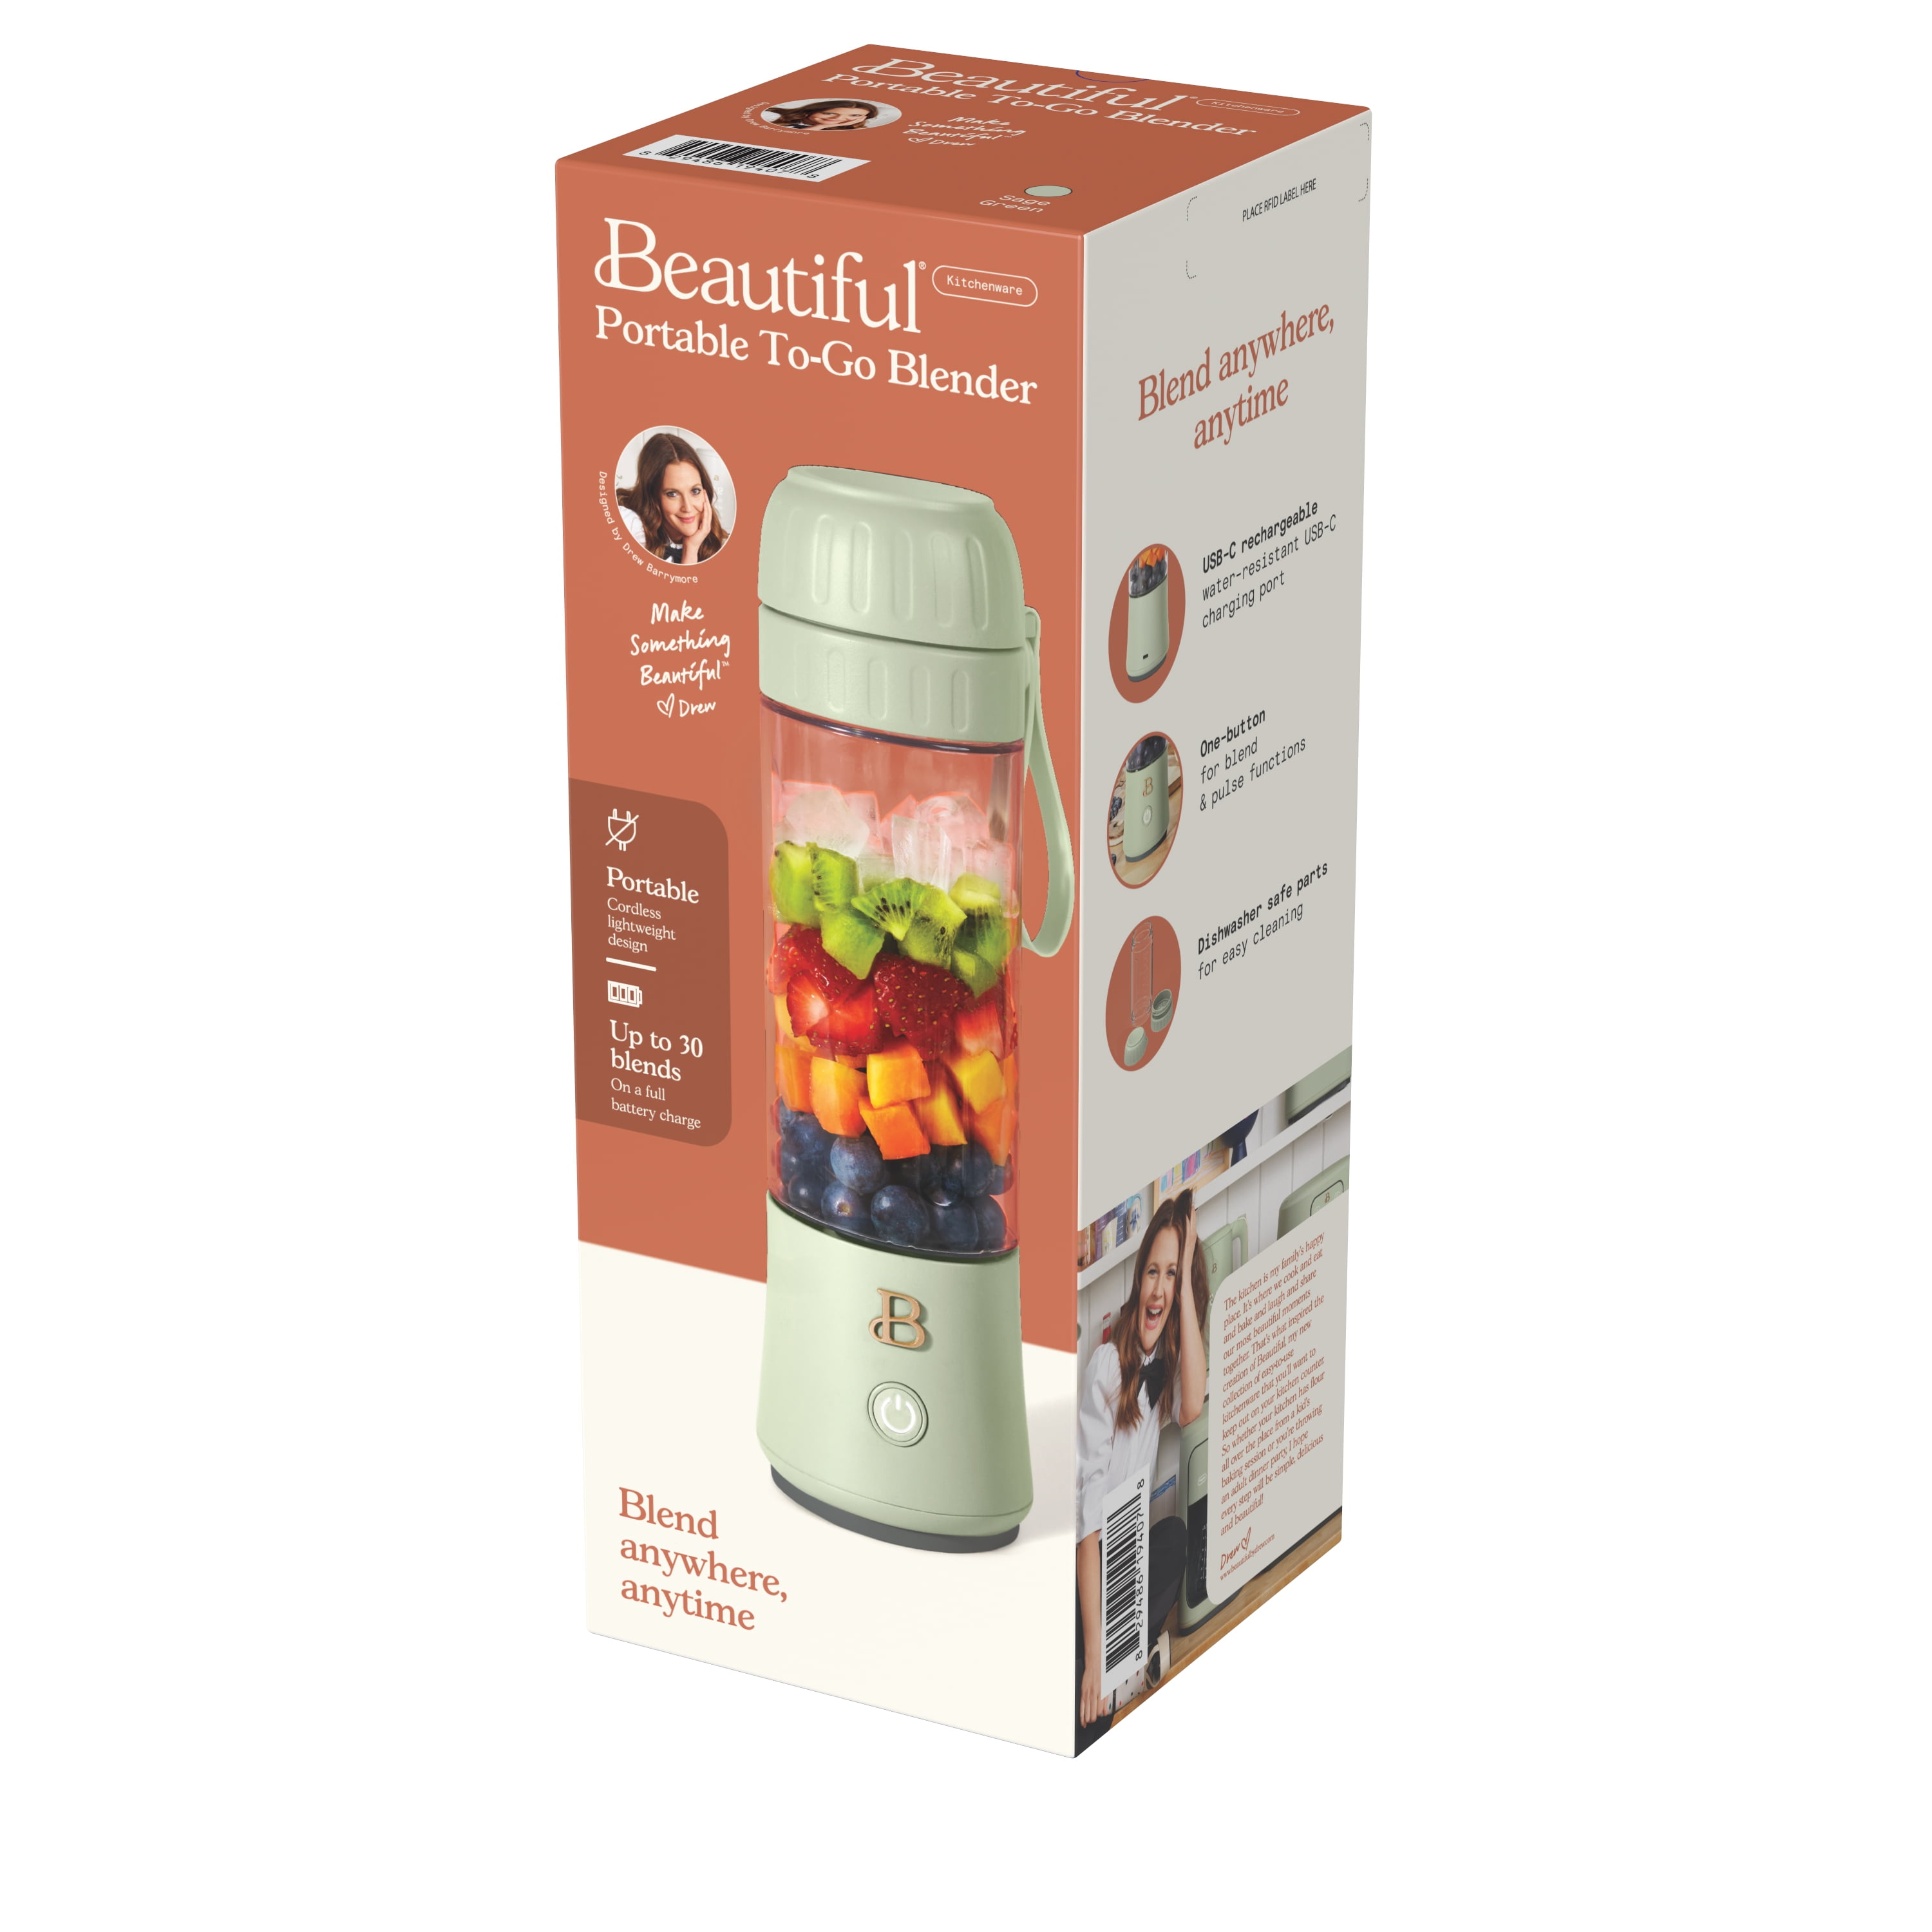 Beautiful Portable To-Go Blender 2.0, 70 W, 16 oz, Sage Green by